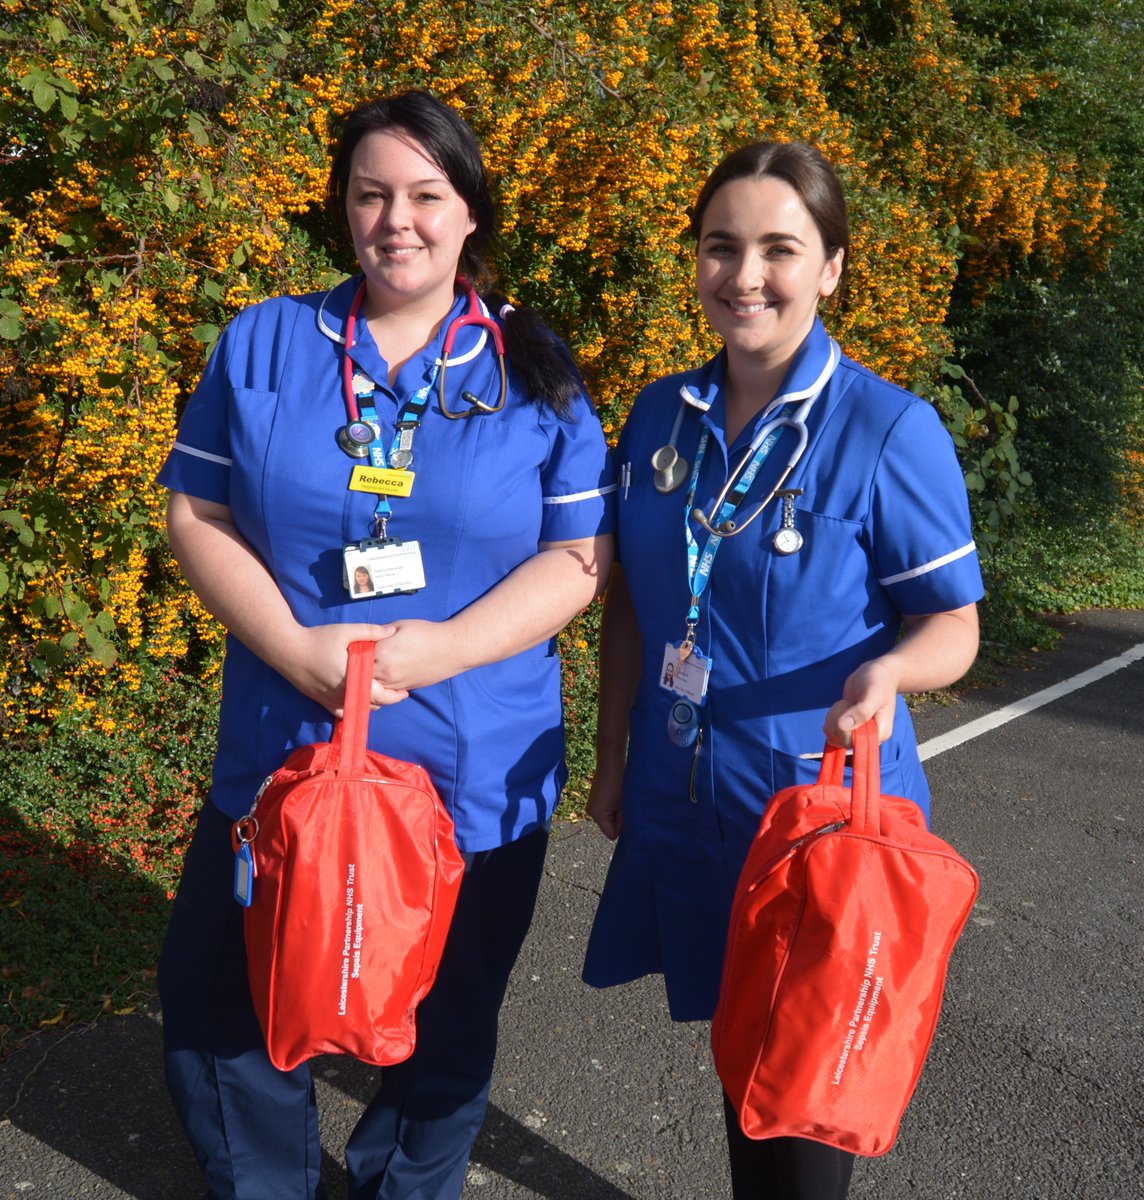 Rebecca Wainwright (left), Katherine Hill (right) and Katie Willis (not pictured) are the latest LPT district nurses, strengthening the clinical and operational leadership of our adult community nursing teams. Both were selected from within LPT for 1 year study + placements.